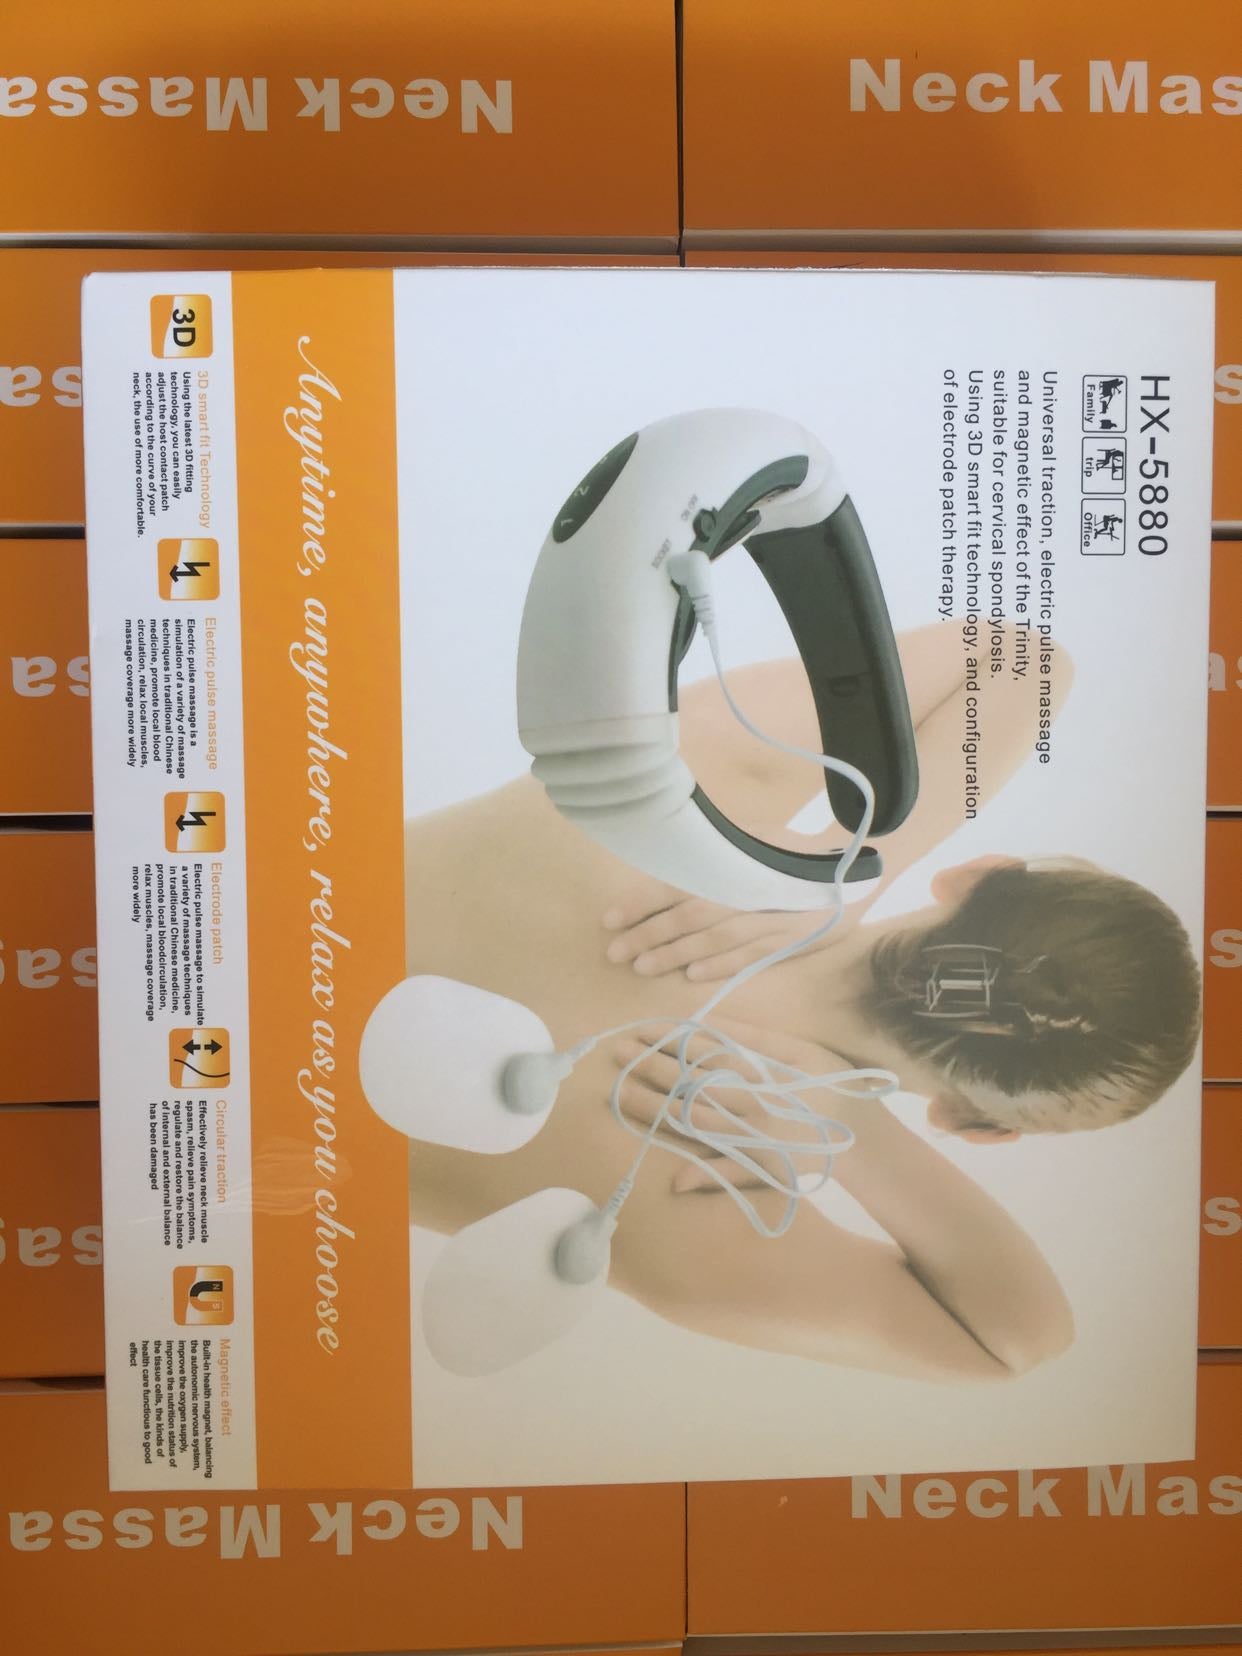 Multi-Functional Neck Massager Massage Device Electric Muscle Vibration Stimulation Relaxation Instrument for Neck Health Care